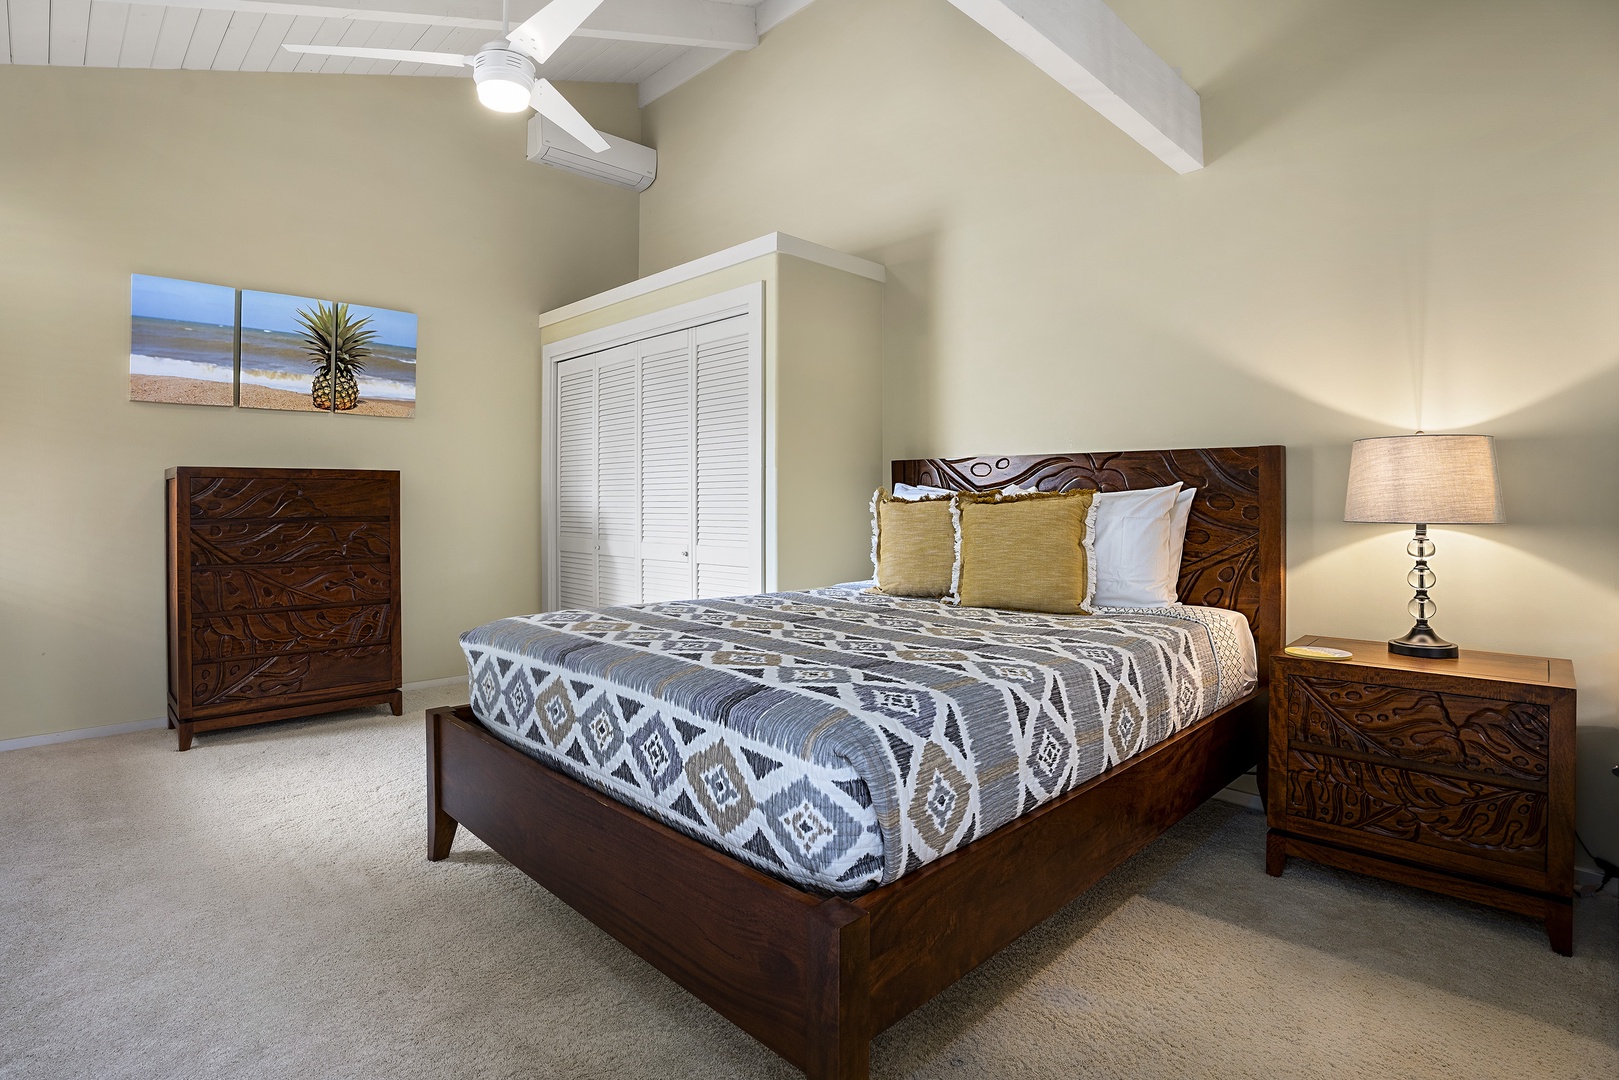 Kailua Kona Vacation Rentals, Pineapple House - Guest bedroom 2 Equipped with Queen bed, A/C & TV